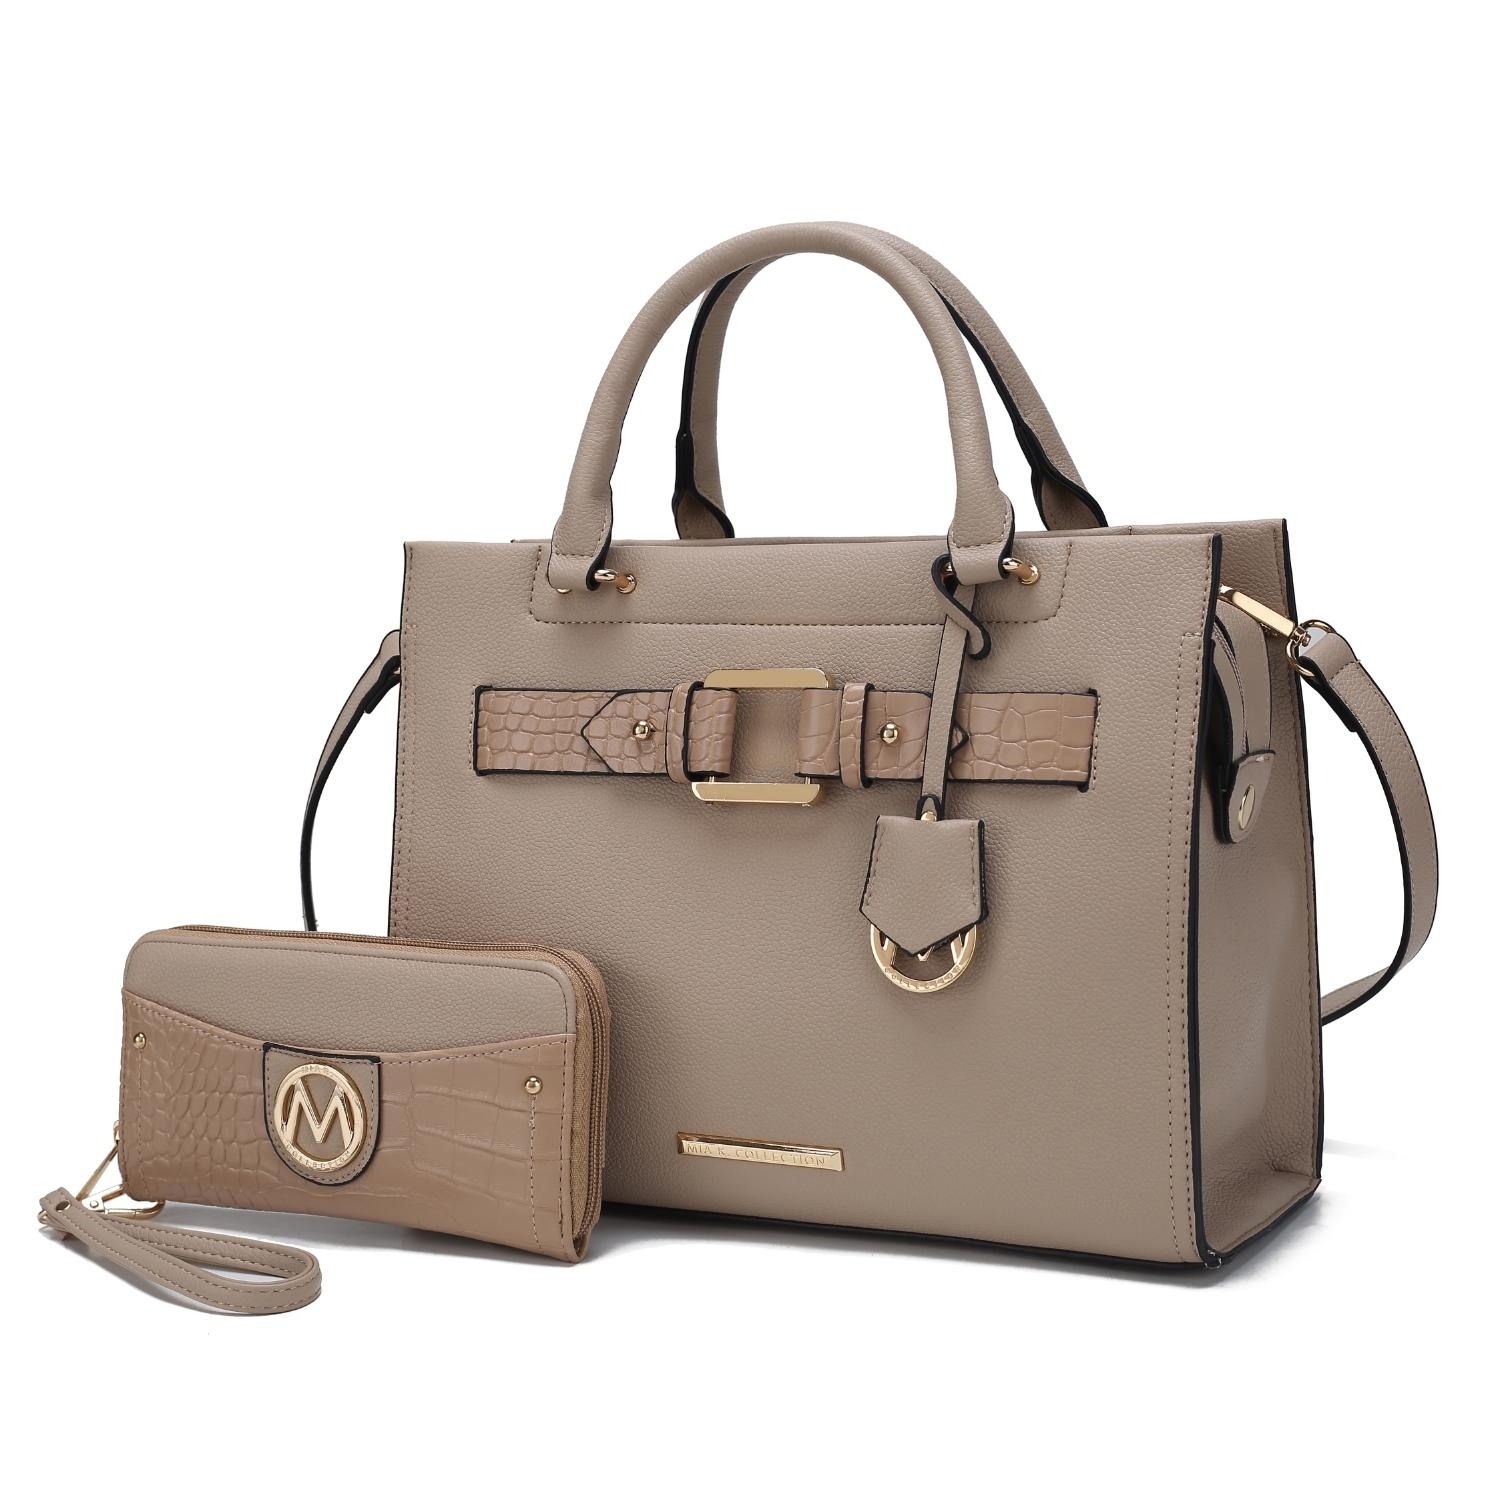 MKF Collection Virginia Vegan Leather Women's Tote Bag By Mia K With Wallet -2 Pieces - Taupe